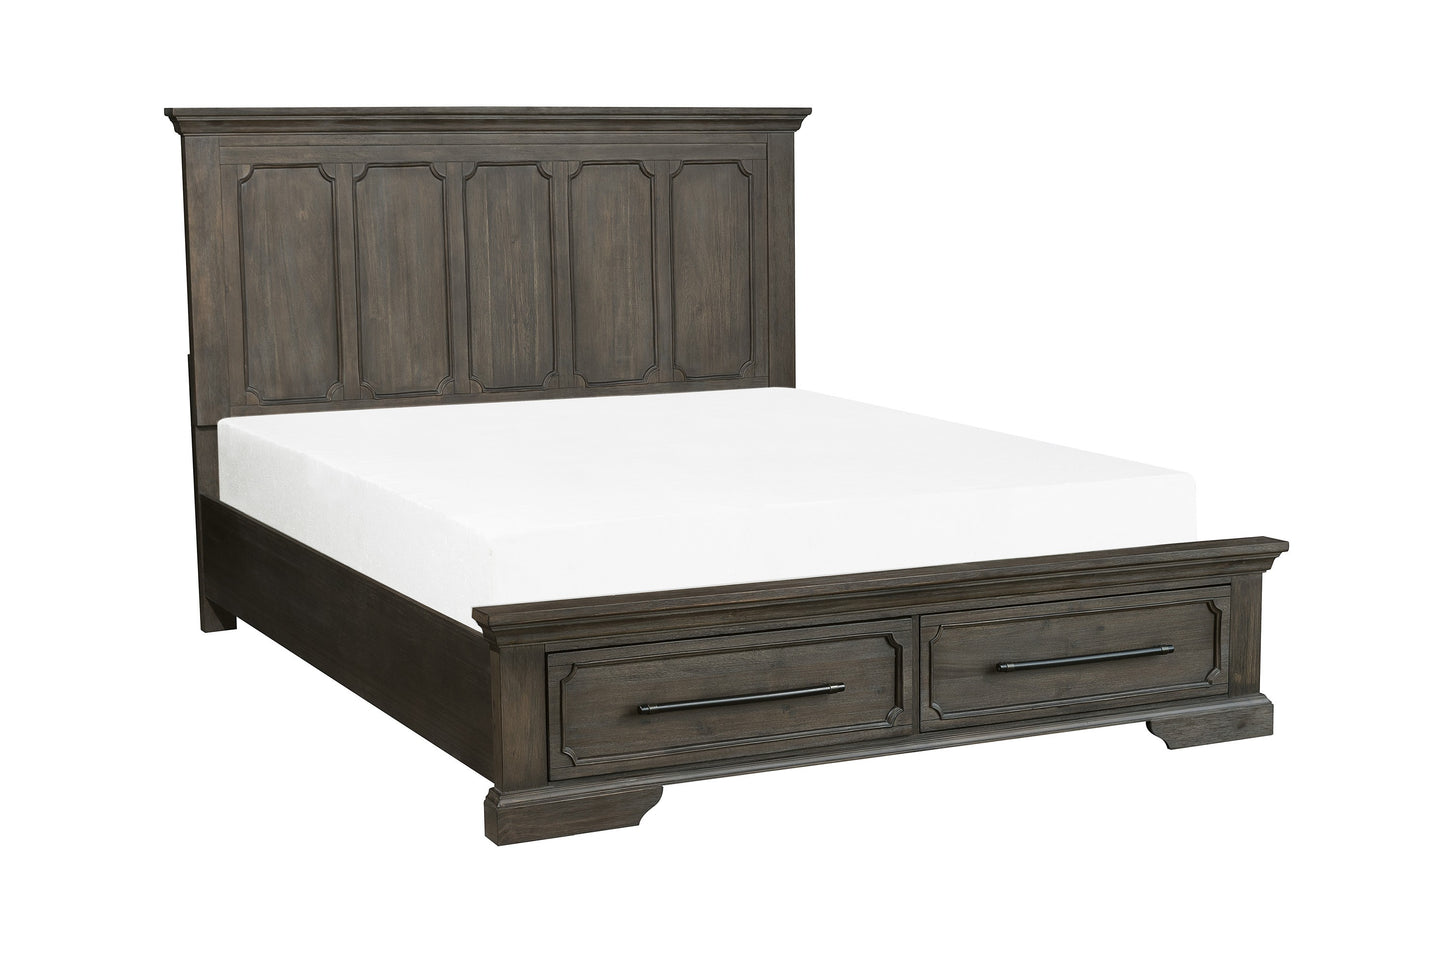 Homelegance Toulon 6PC Bedroom Set E King Platform Bed with Footboard Storages Dresser Mirror Two Nightstand Chest in Distressed Oak